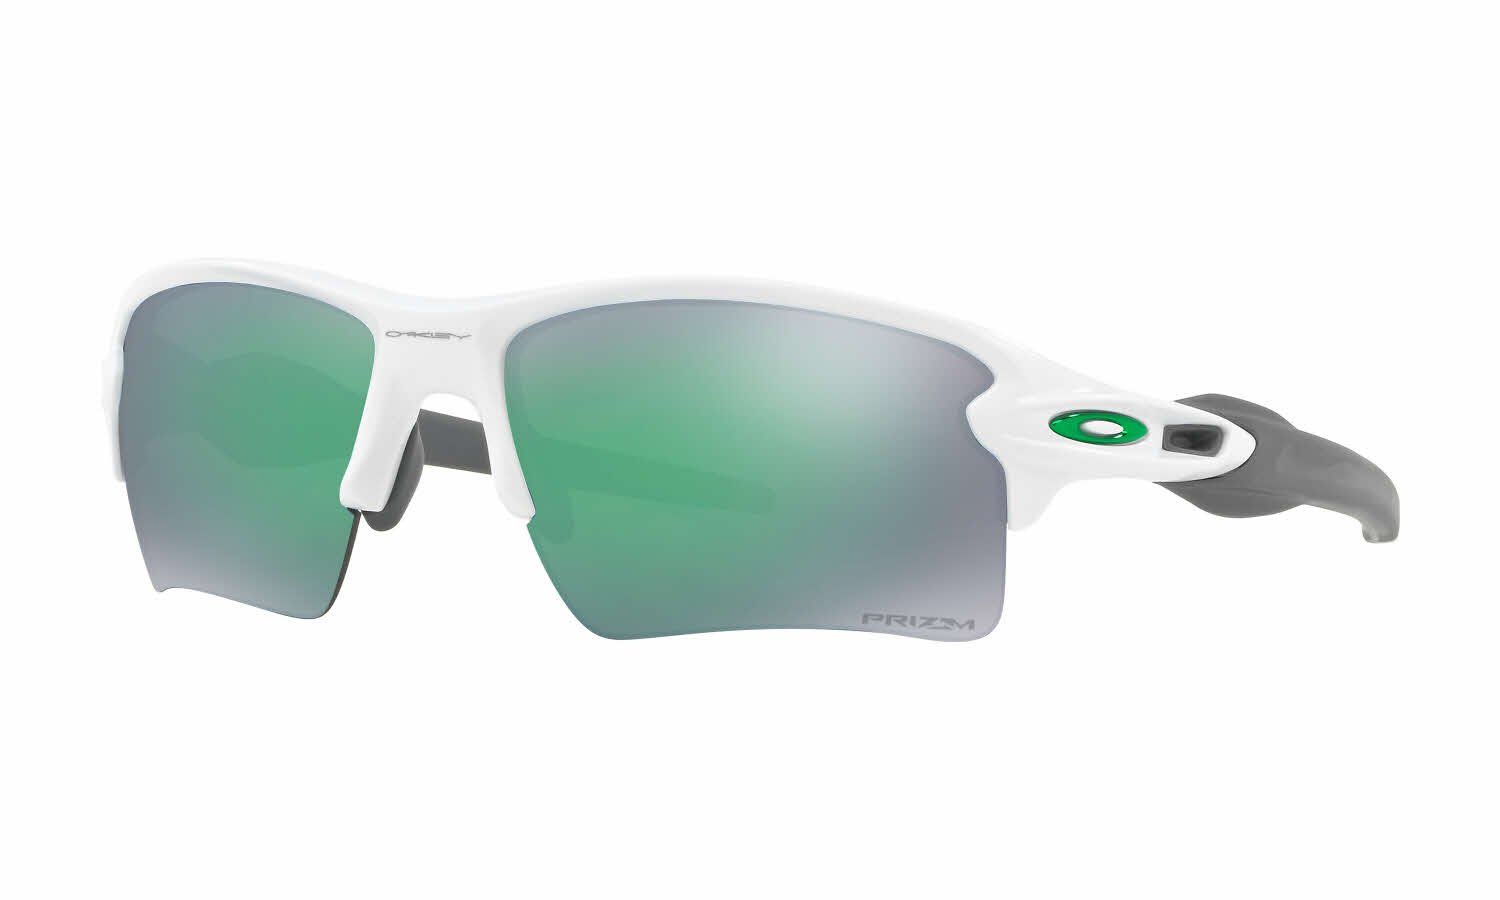 The Best Golf Sunglasses and Lenses for Golf